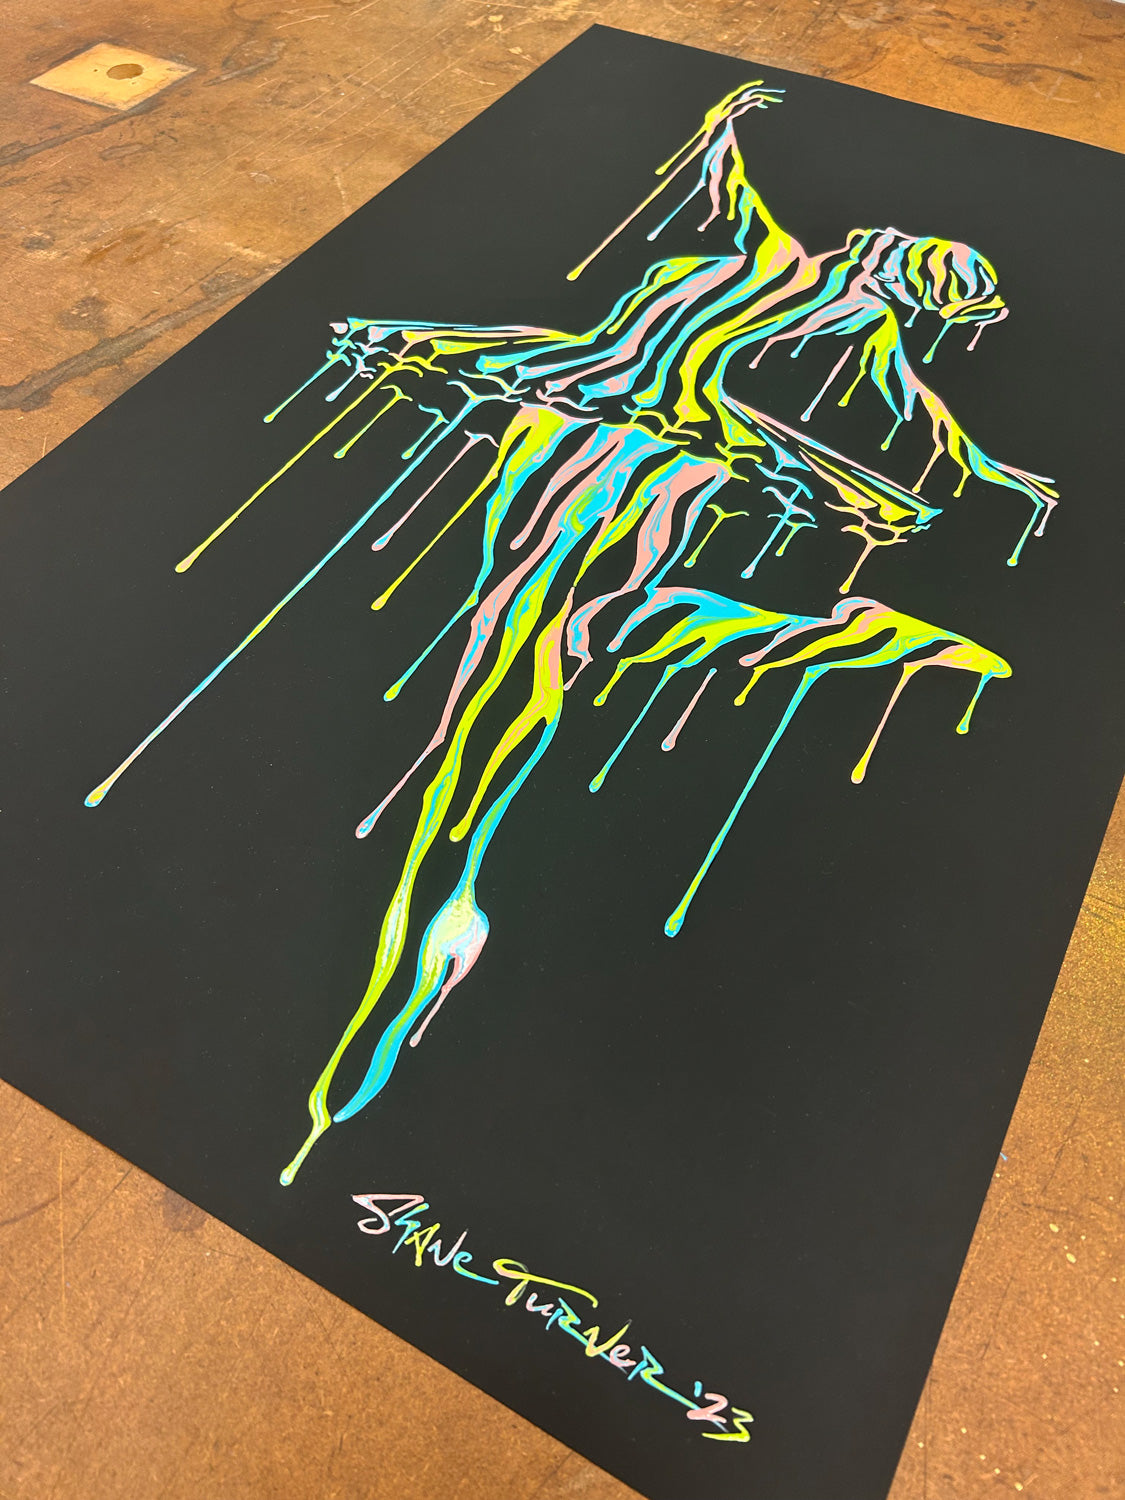 SHANE TURNER - Music in Motion 8.0 - 1/1, HAND PAINTED